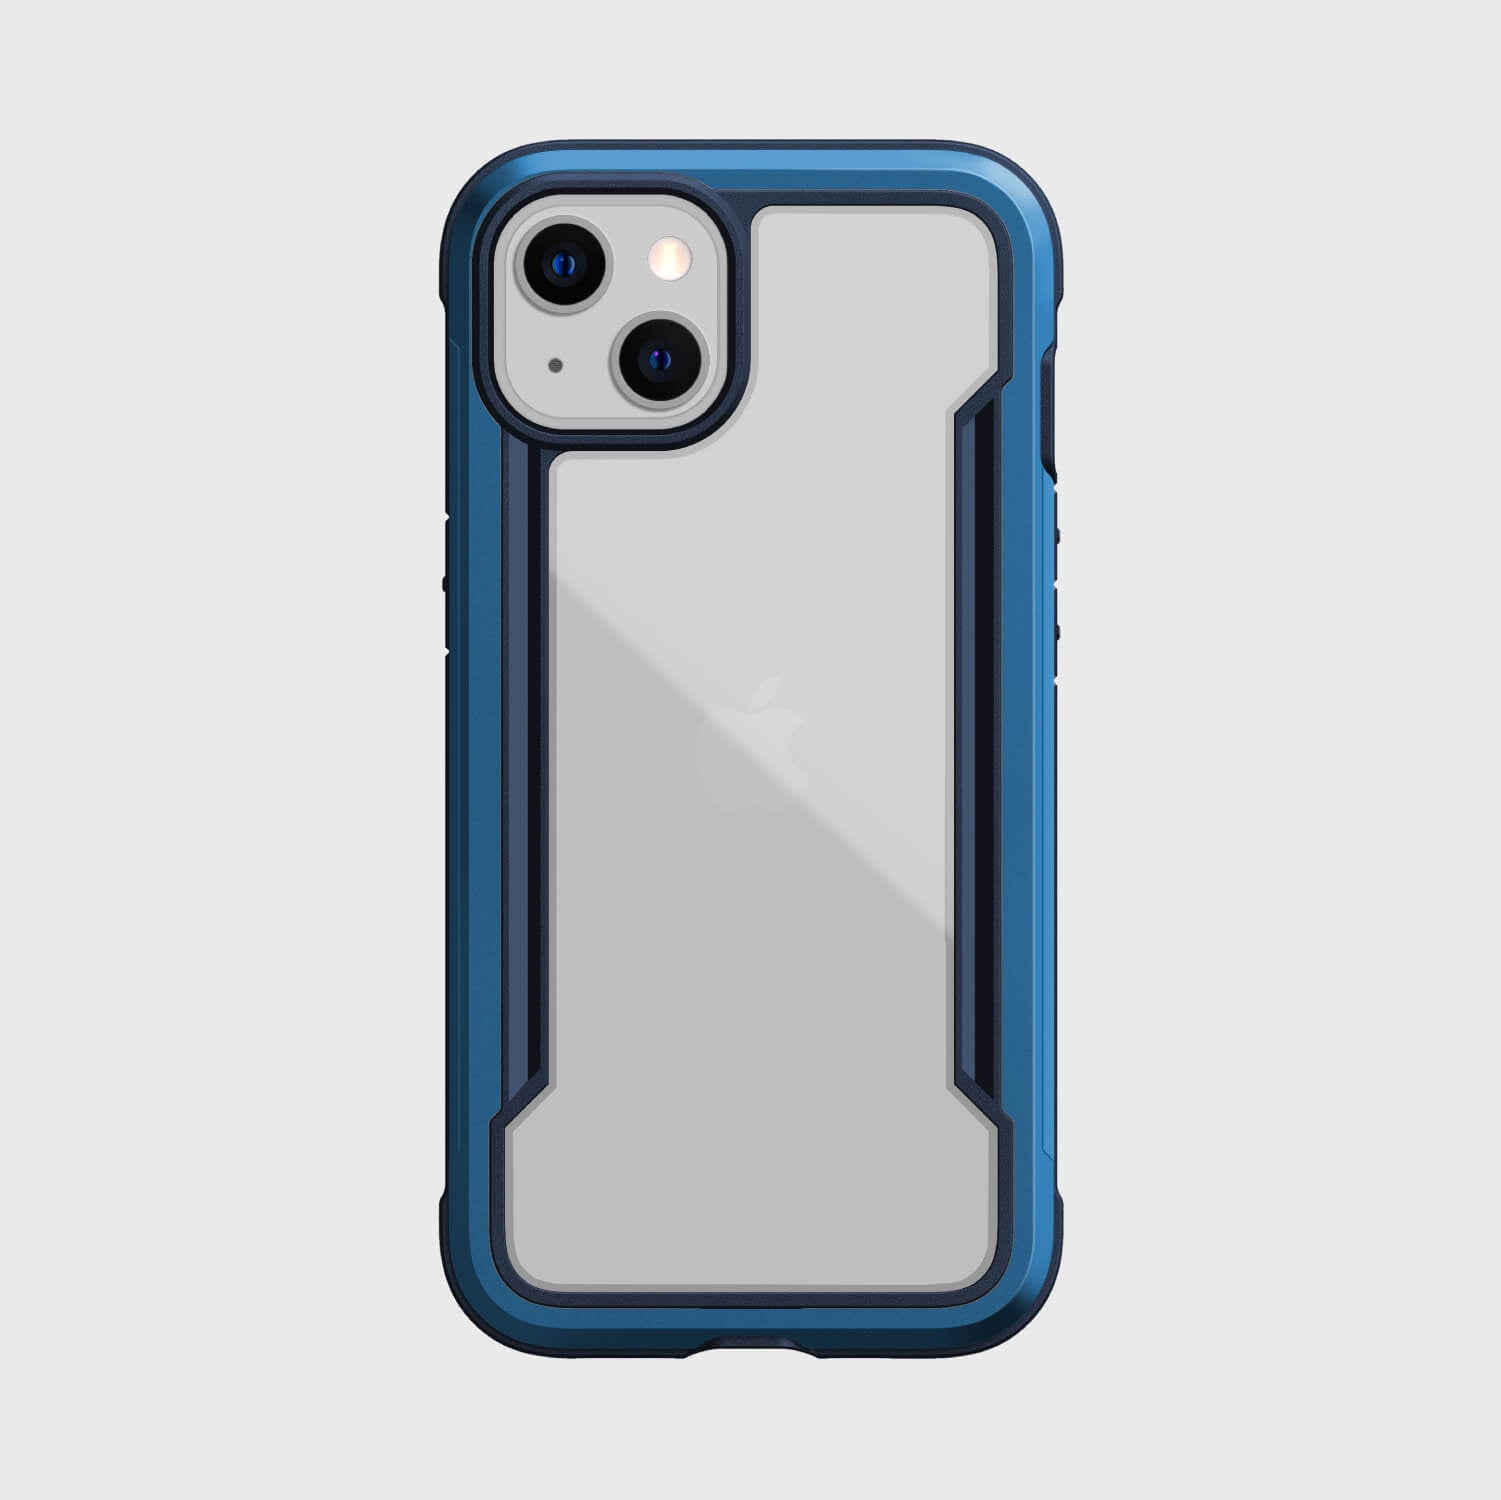 The iPhone 13 Mini Case - SHIELD PRO by Raptic is shown in blue.